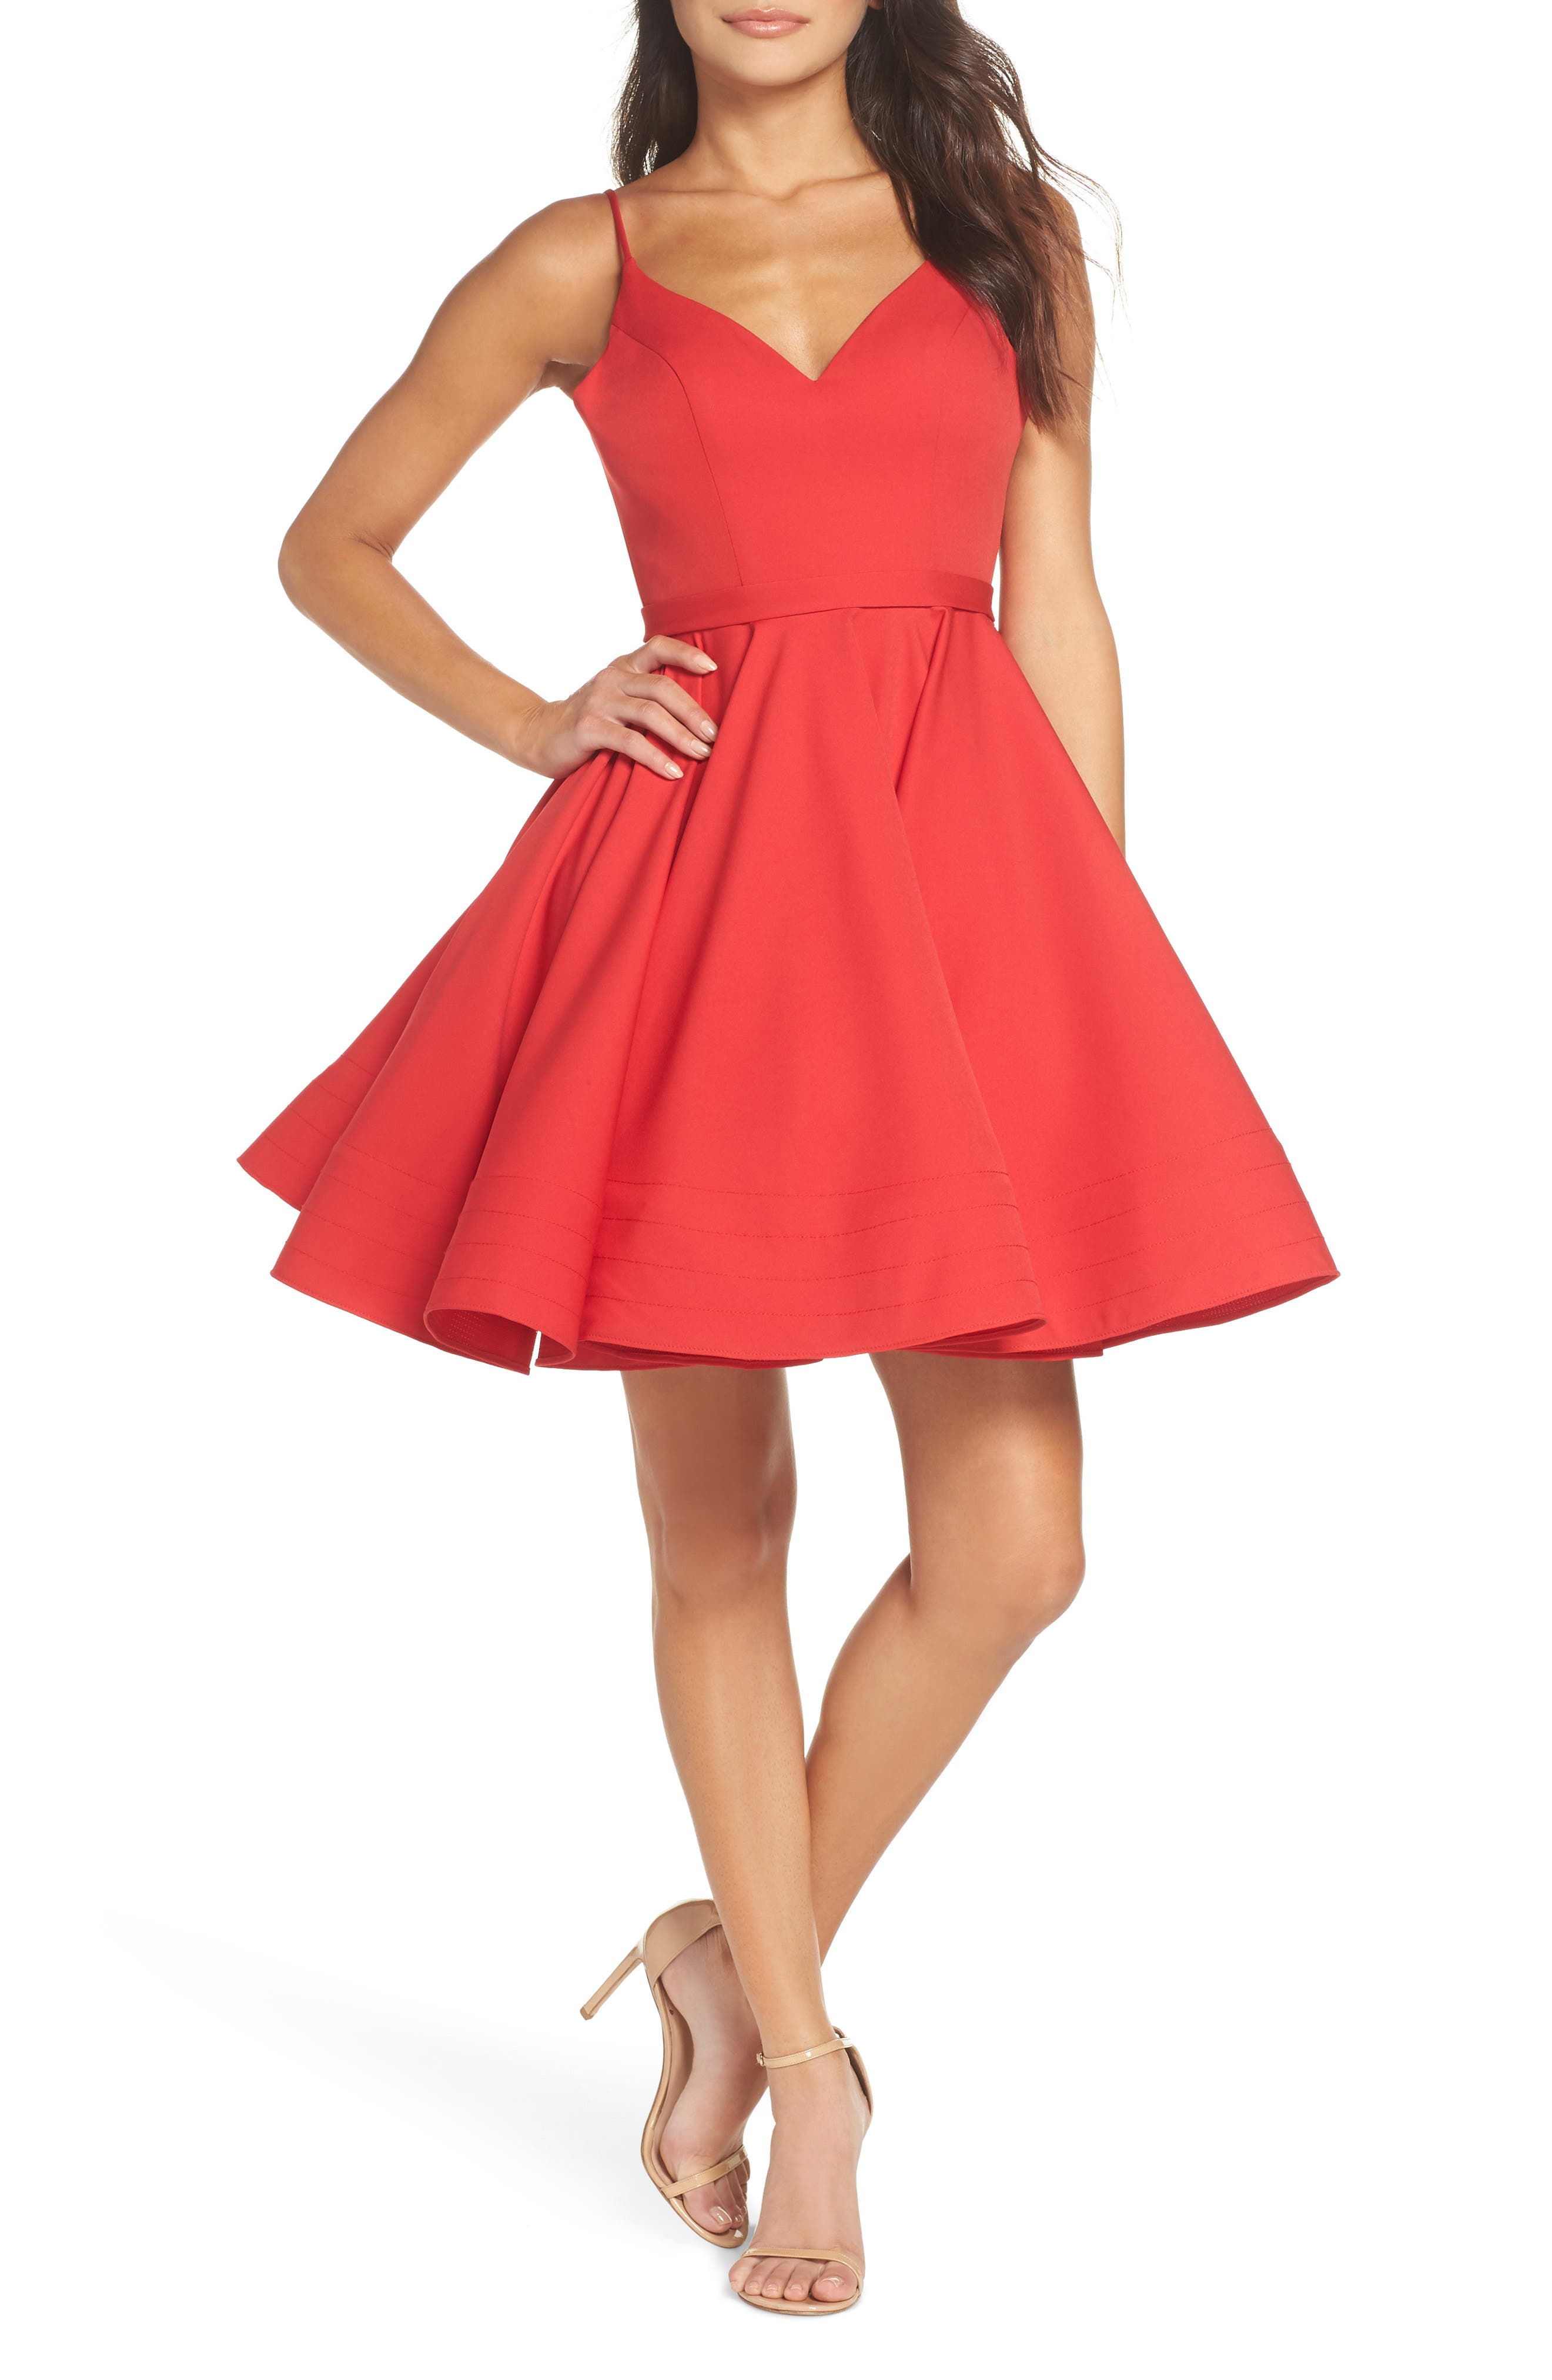 Red Cocktail Dresses ☀ Party Dresses ...